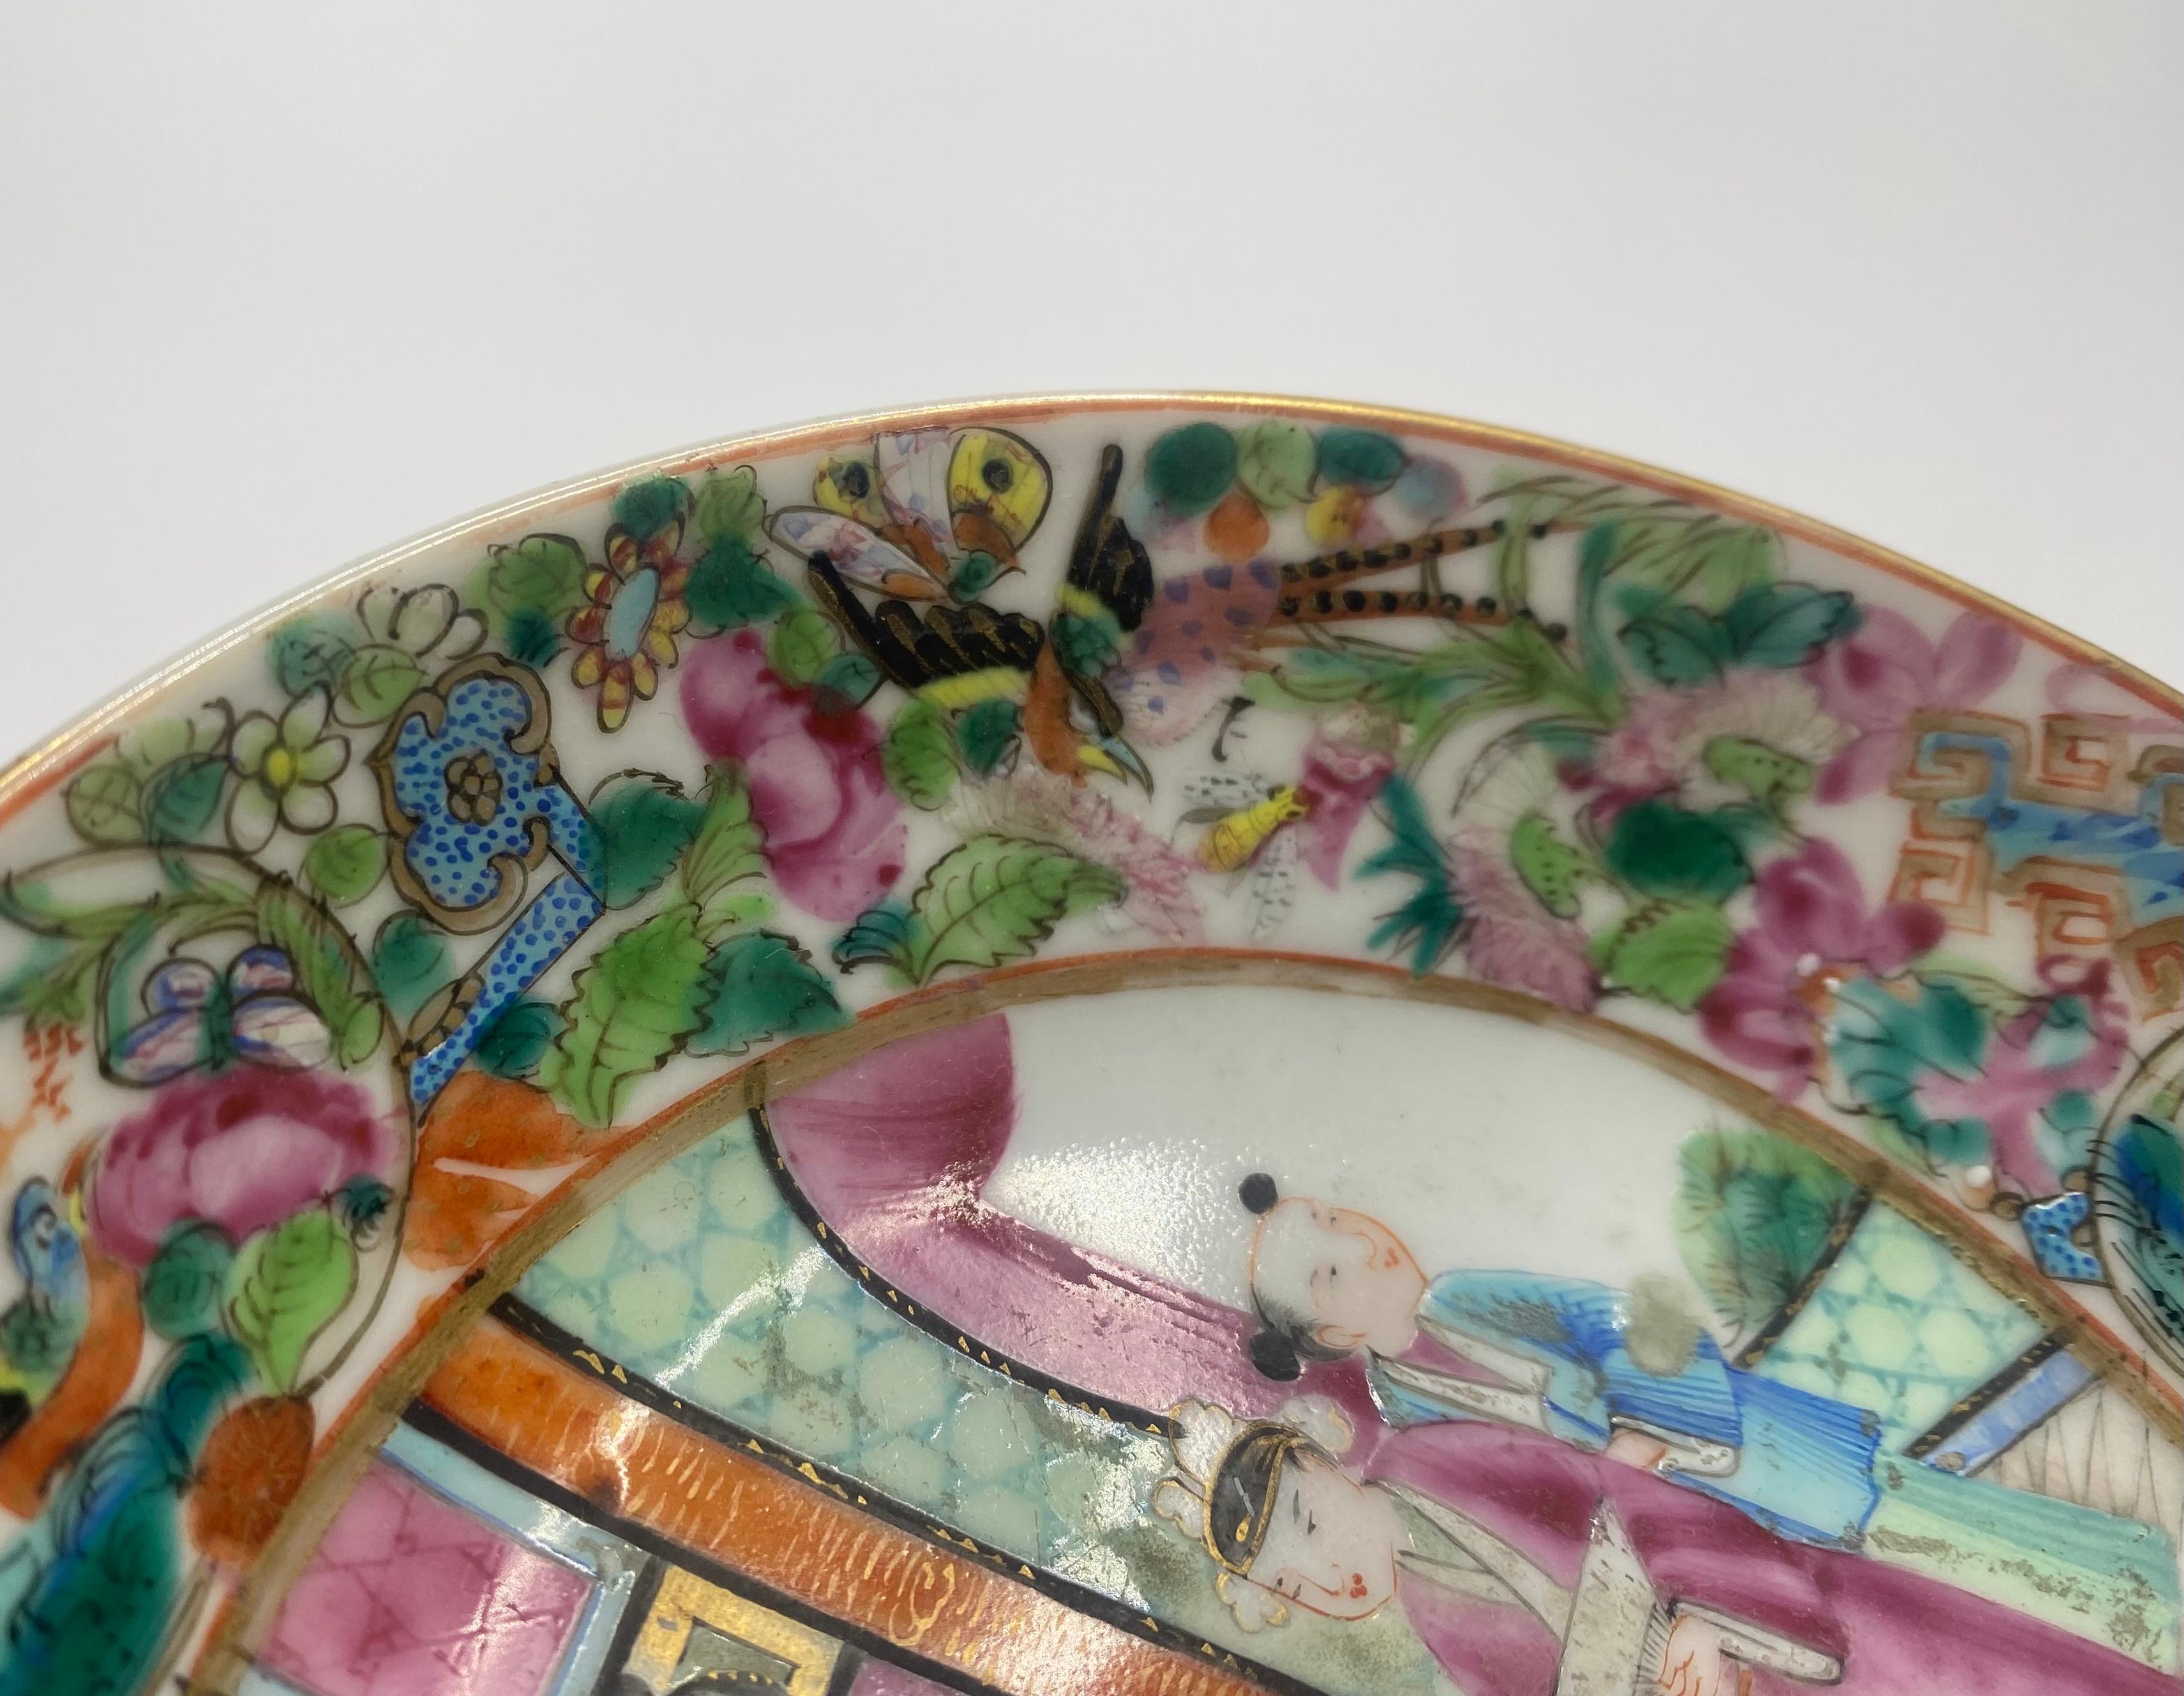 Mid-19th Century Chinese Canton porcelain cup & saucer, c. 1850. Qing dynasty.